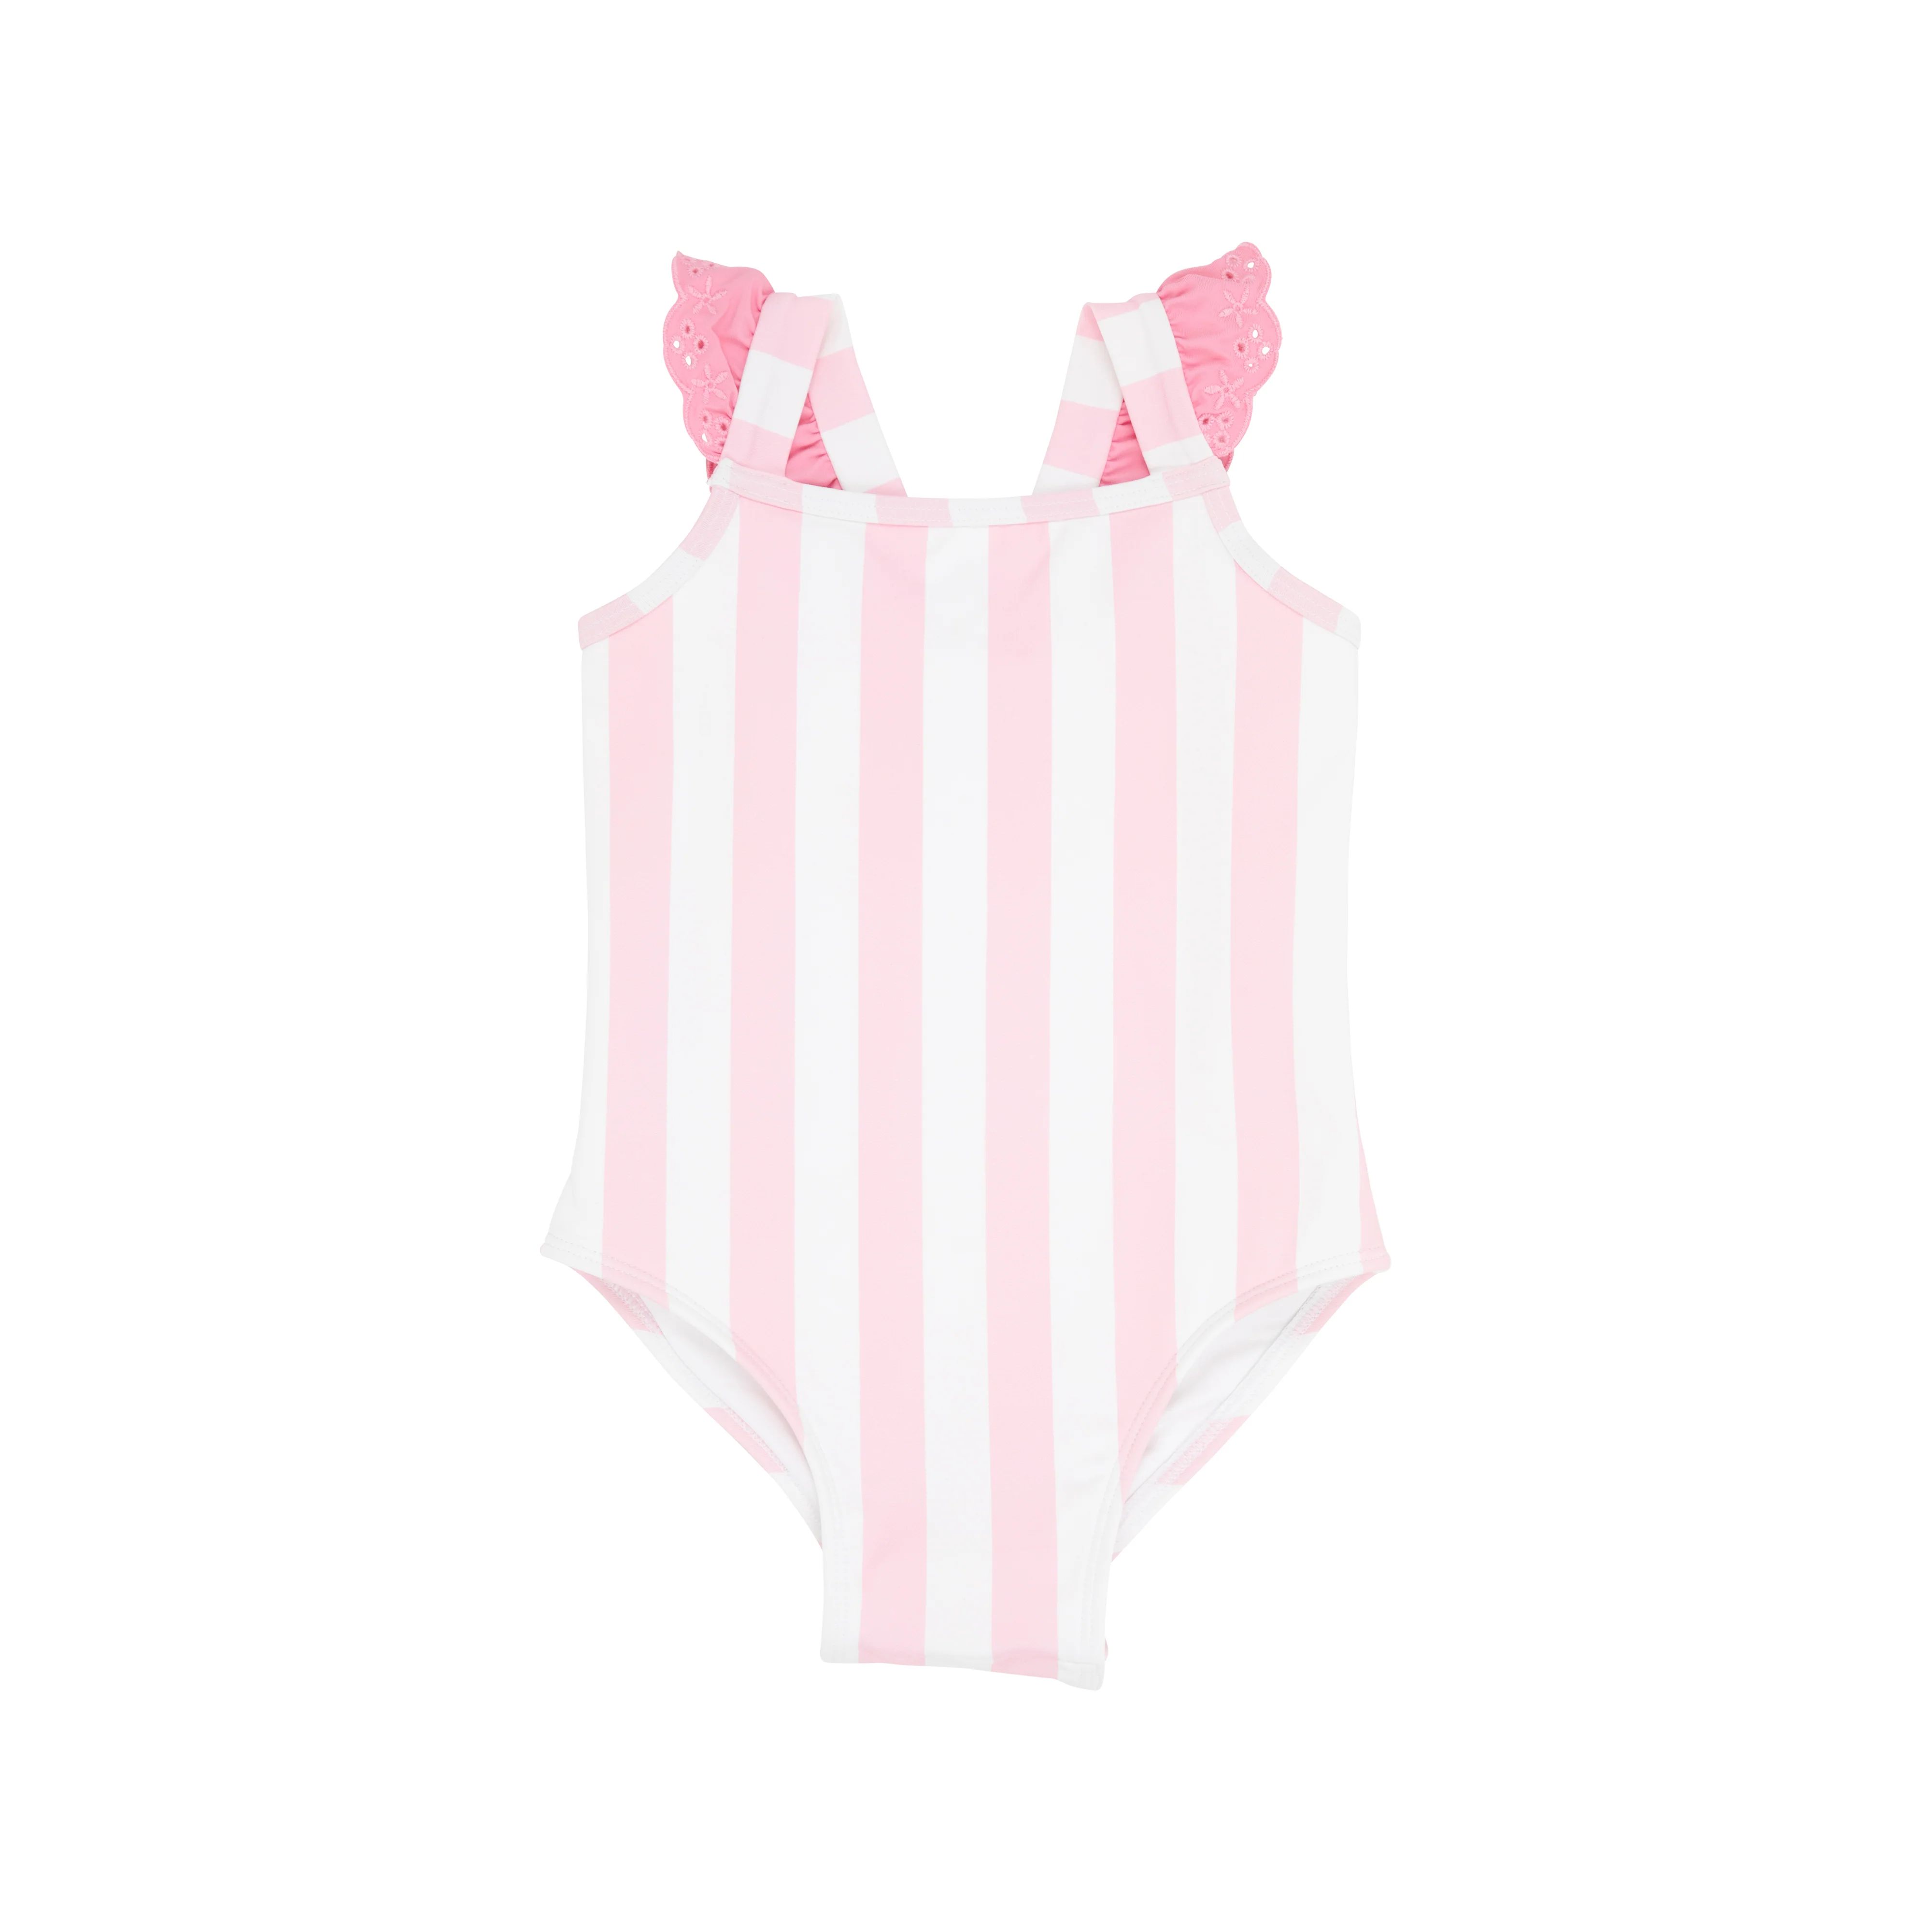 Long Bay Bathing Suit - Caicos Cabana Stripe with Hamptons Hot Pink | The Beaufort Bonnet Company